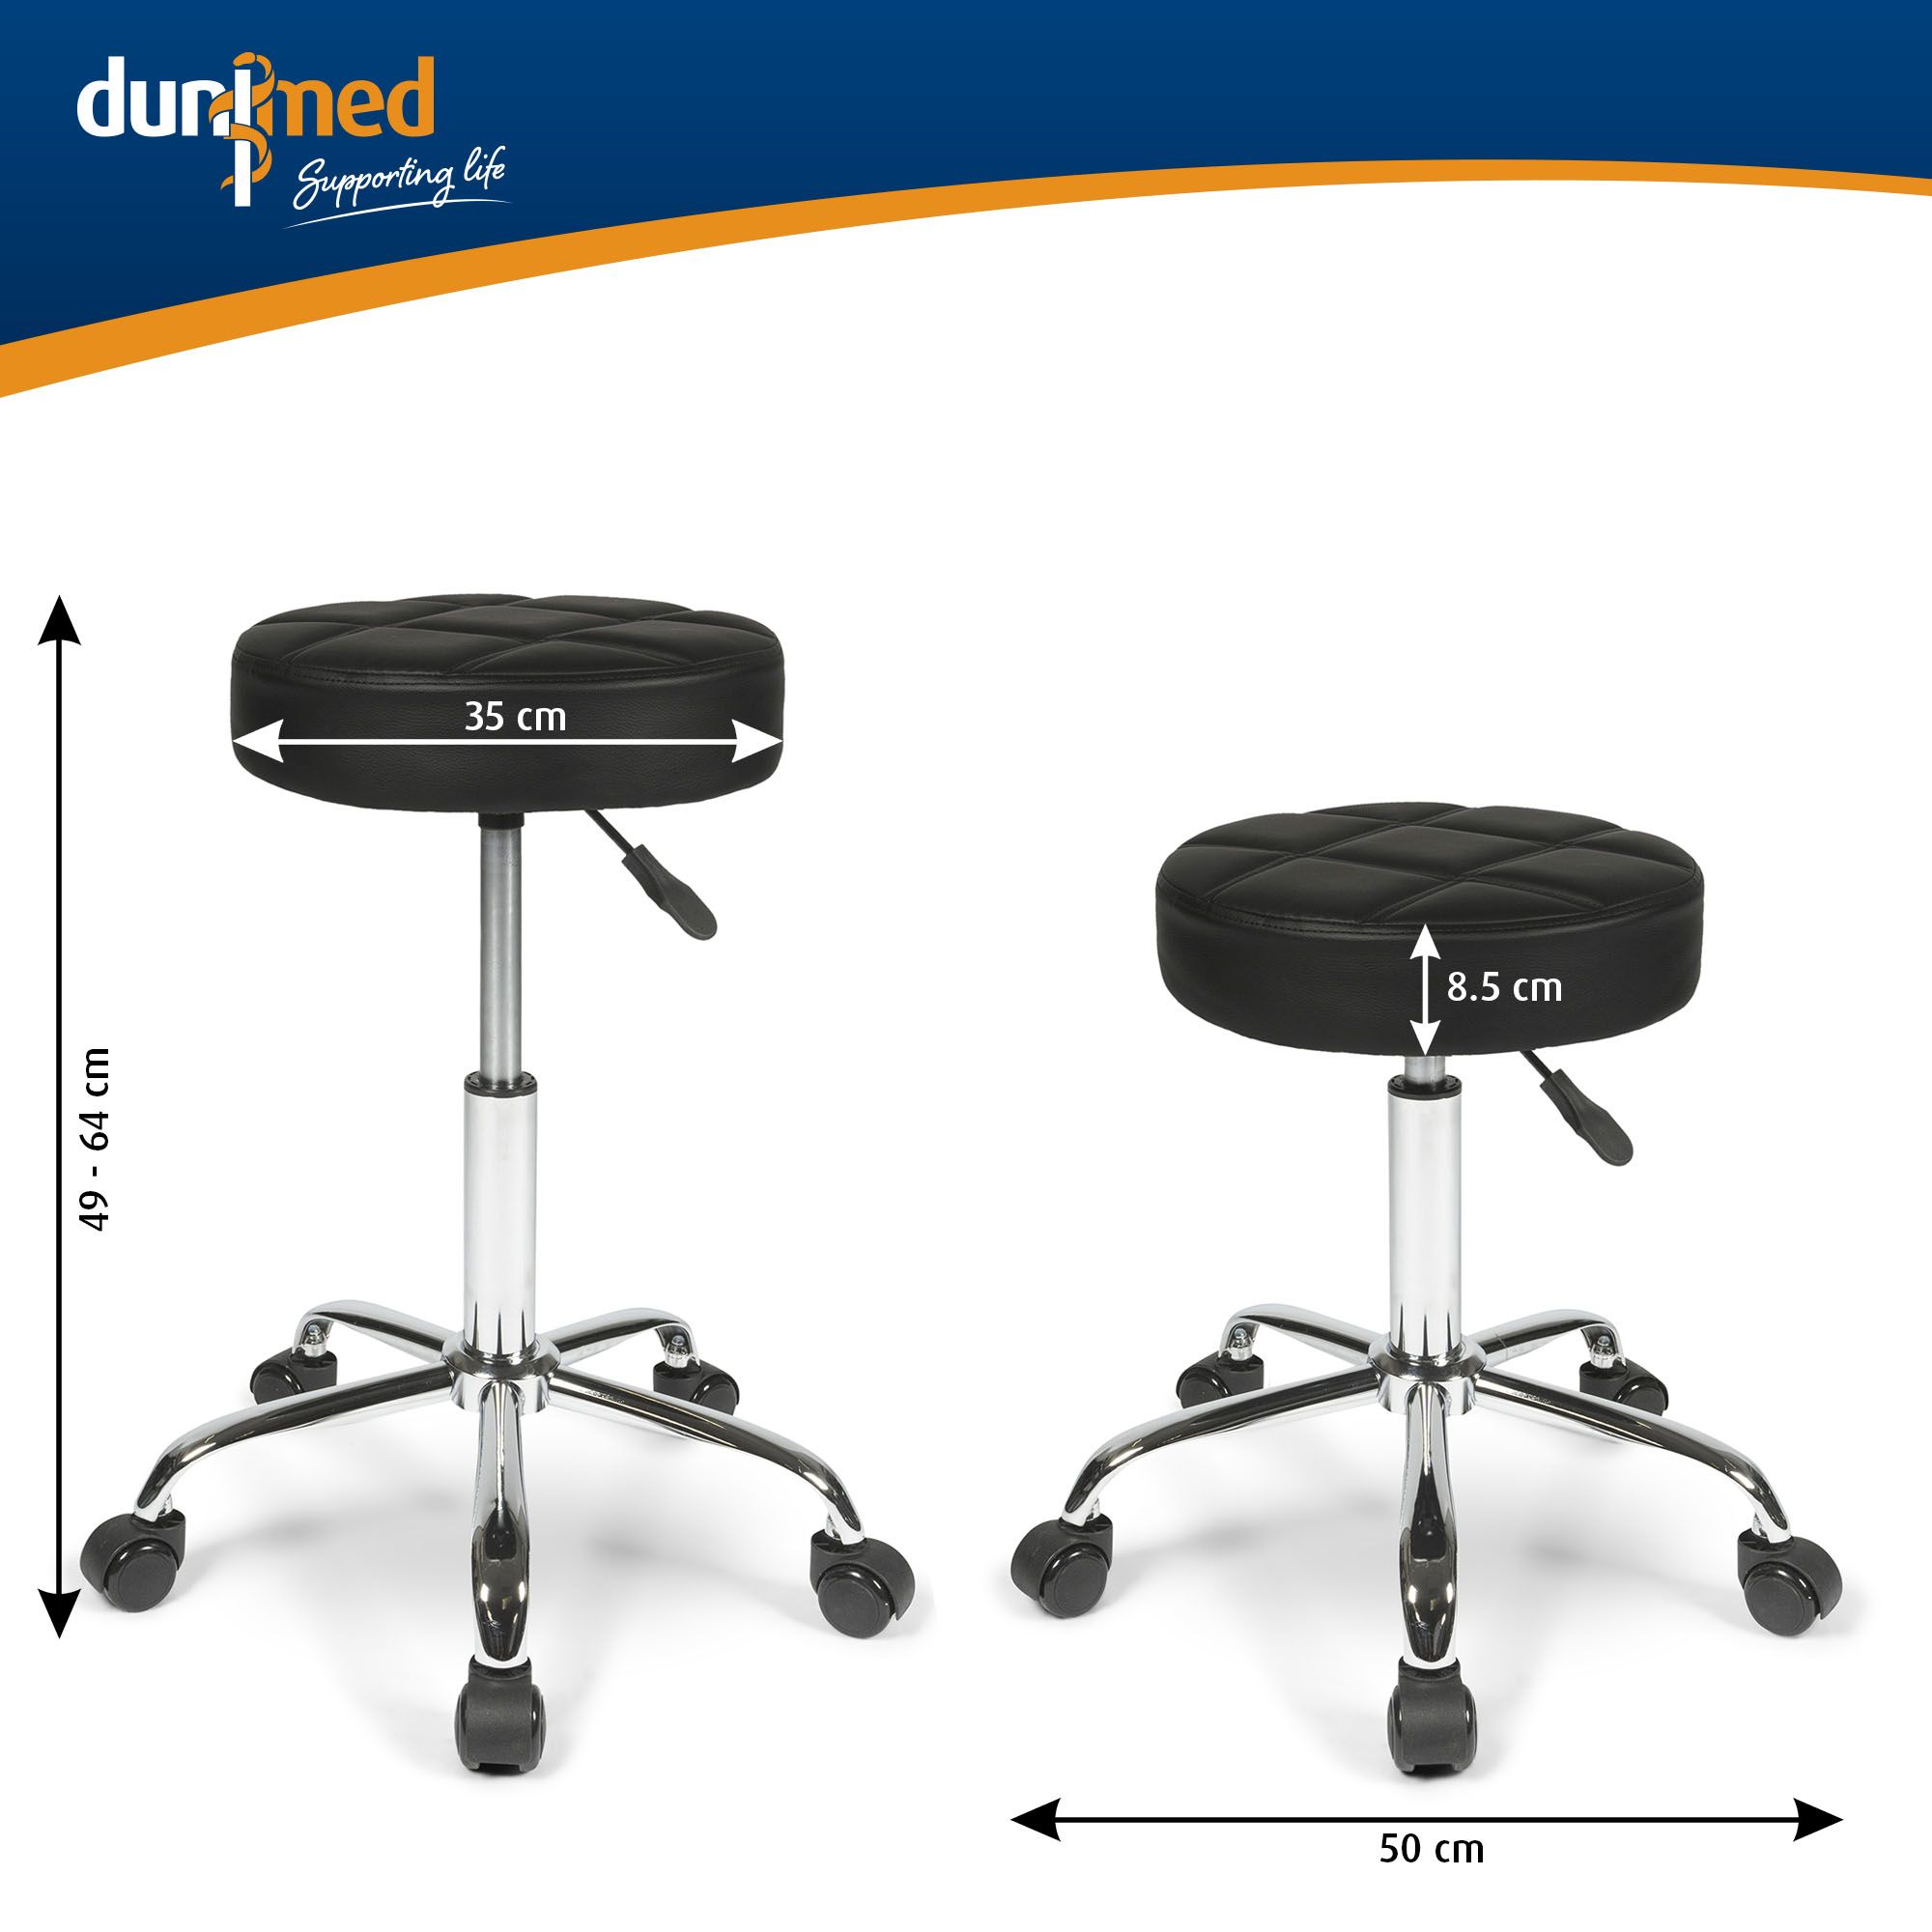 dunimed deluxe design work stool with wheels measurements